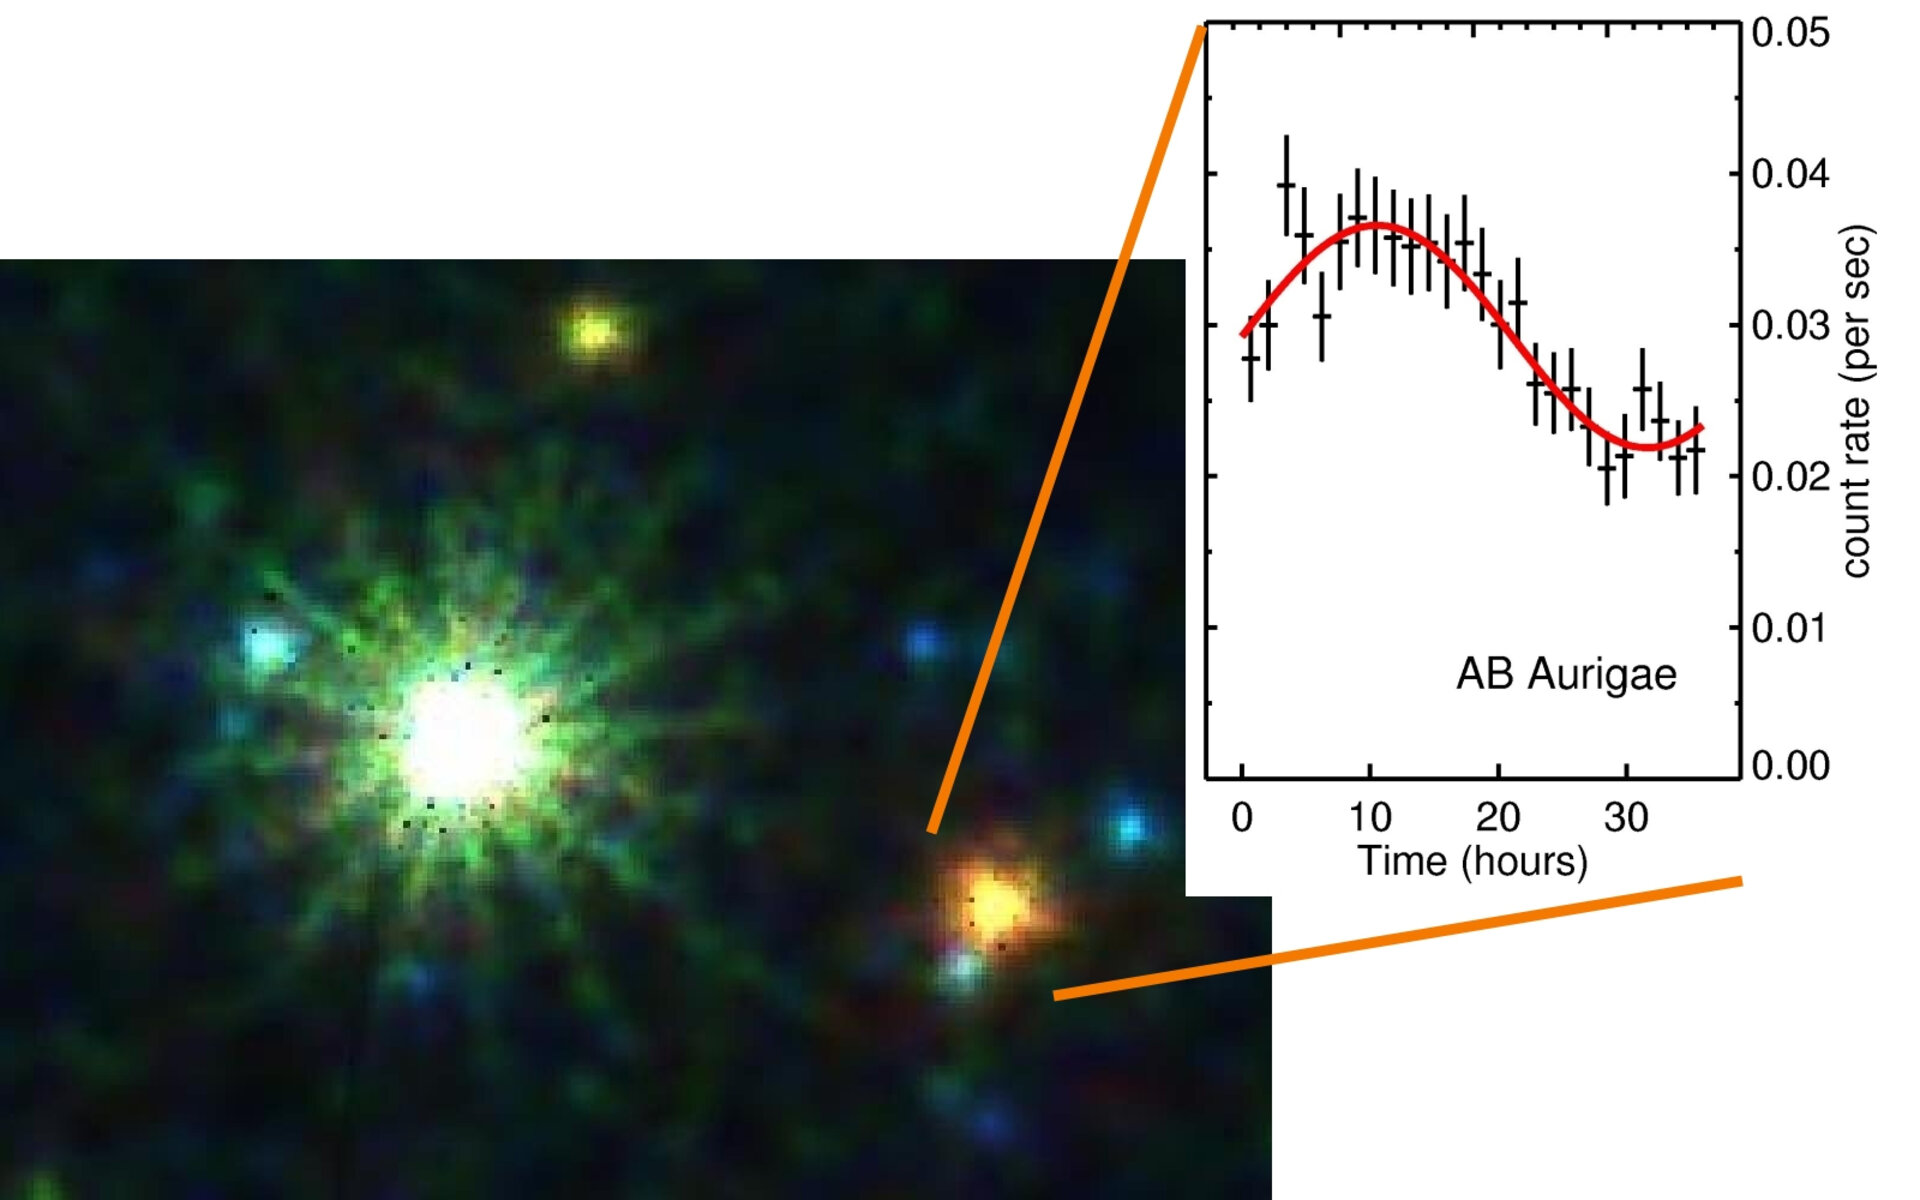 Combined view of AB Aurigae and its light curve